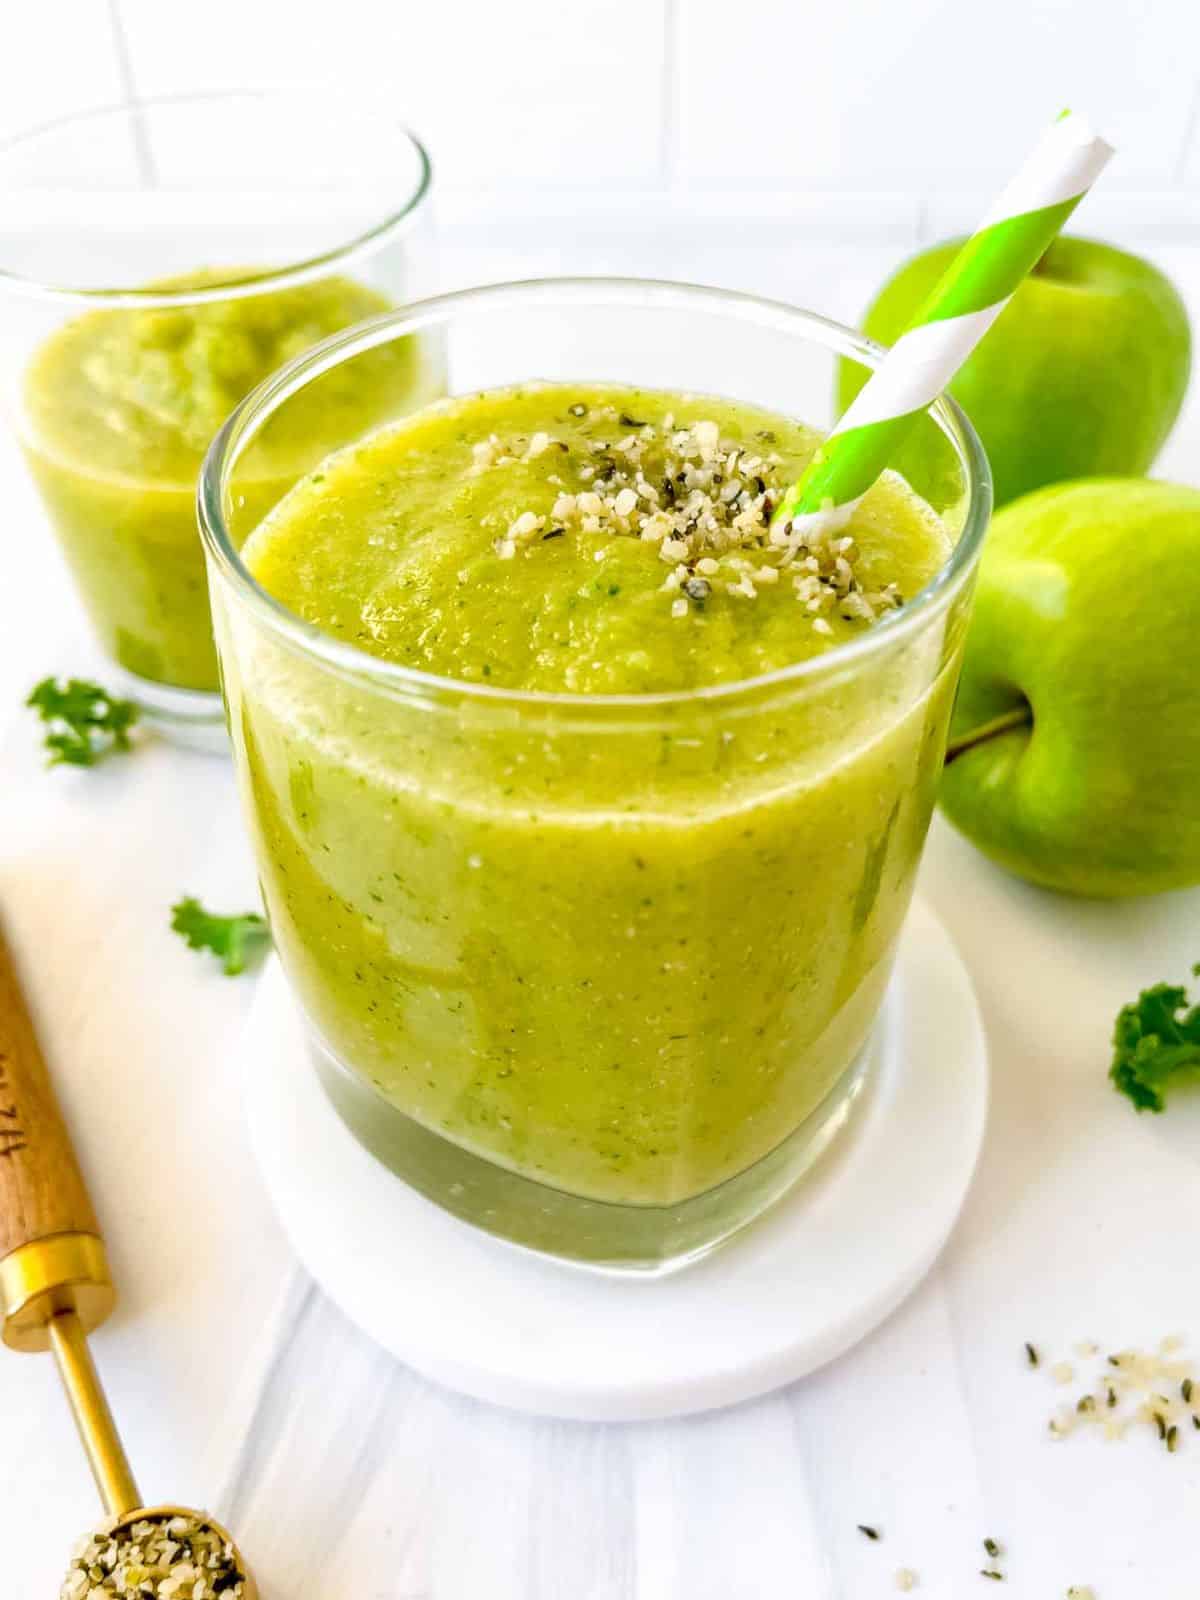 sour apple smoothie in two glasses next to green apples and a spoonful of hemp seeds.